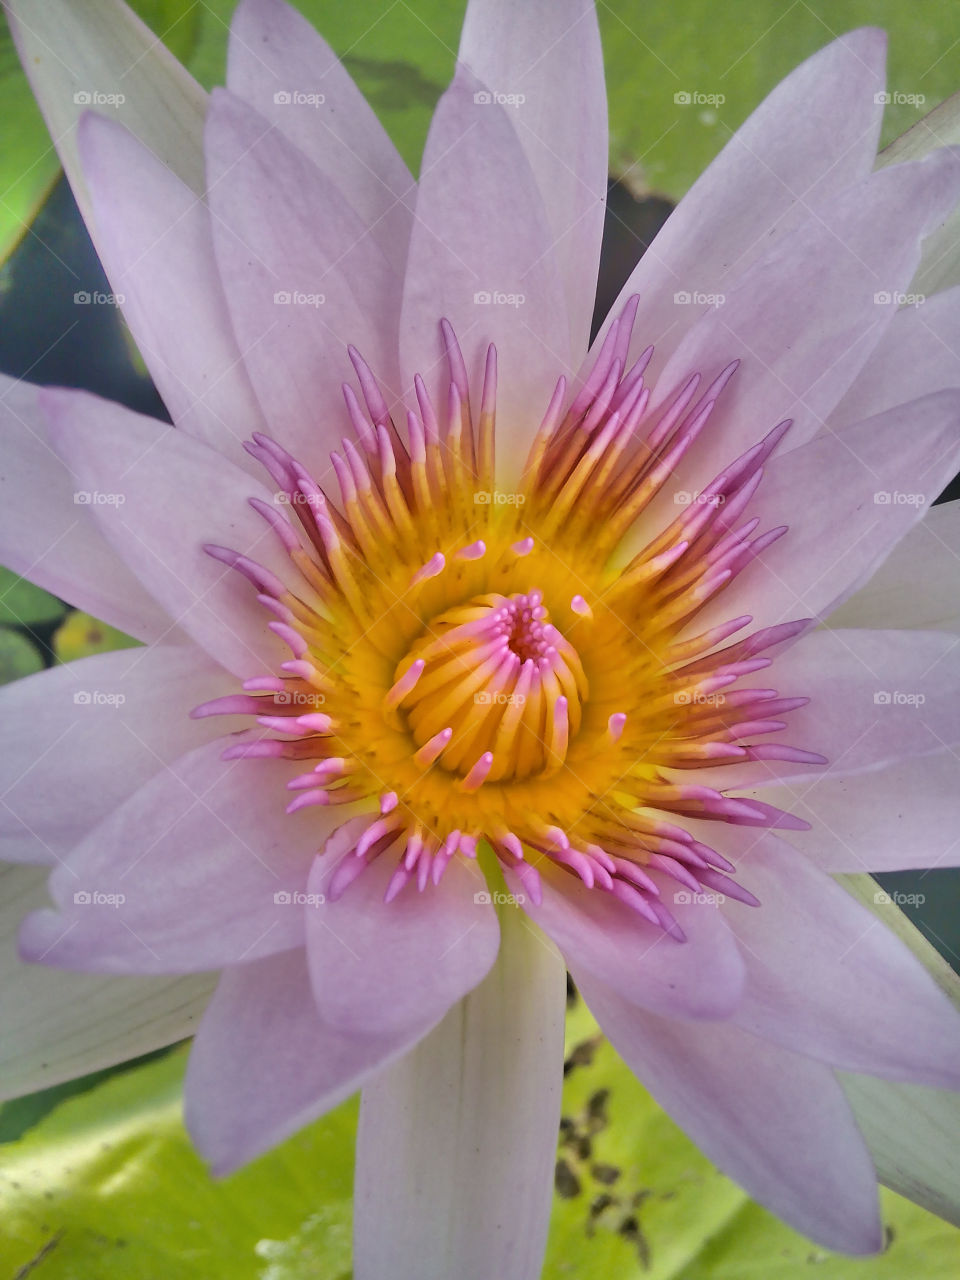 blooming lotus flower. the lotus is one of the most well-known symbols of buddism